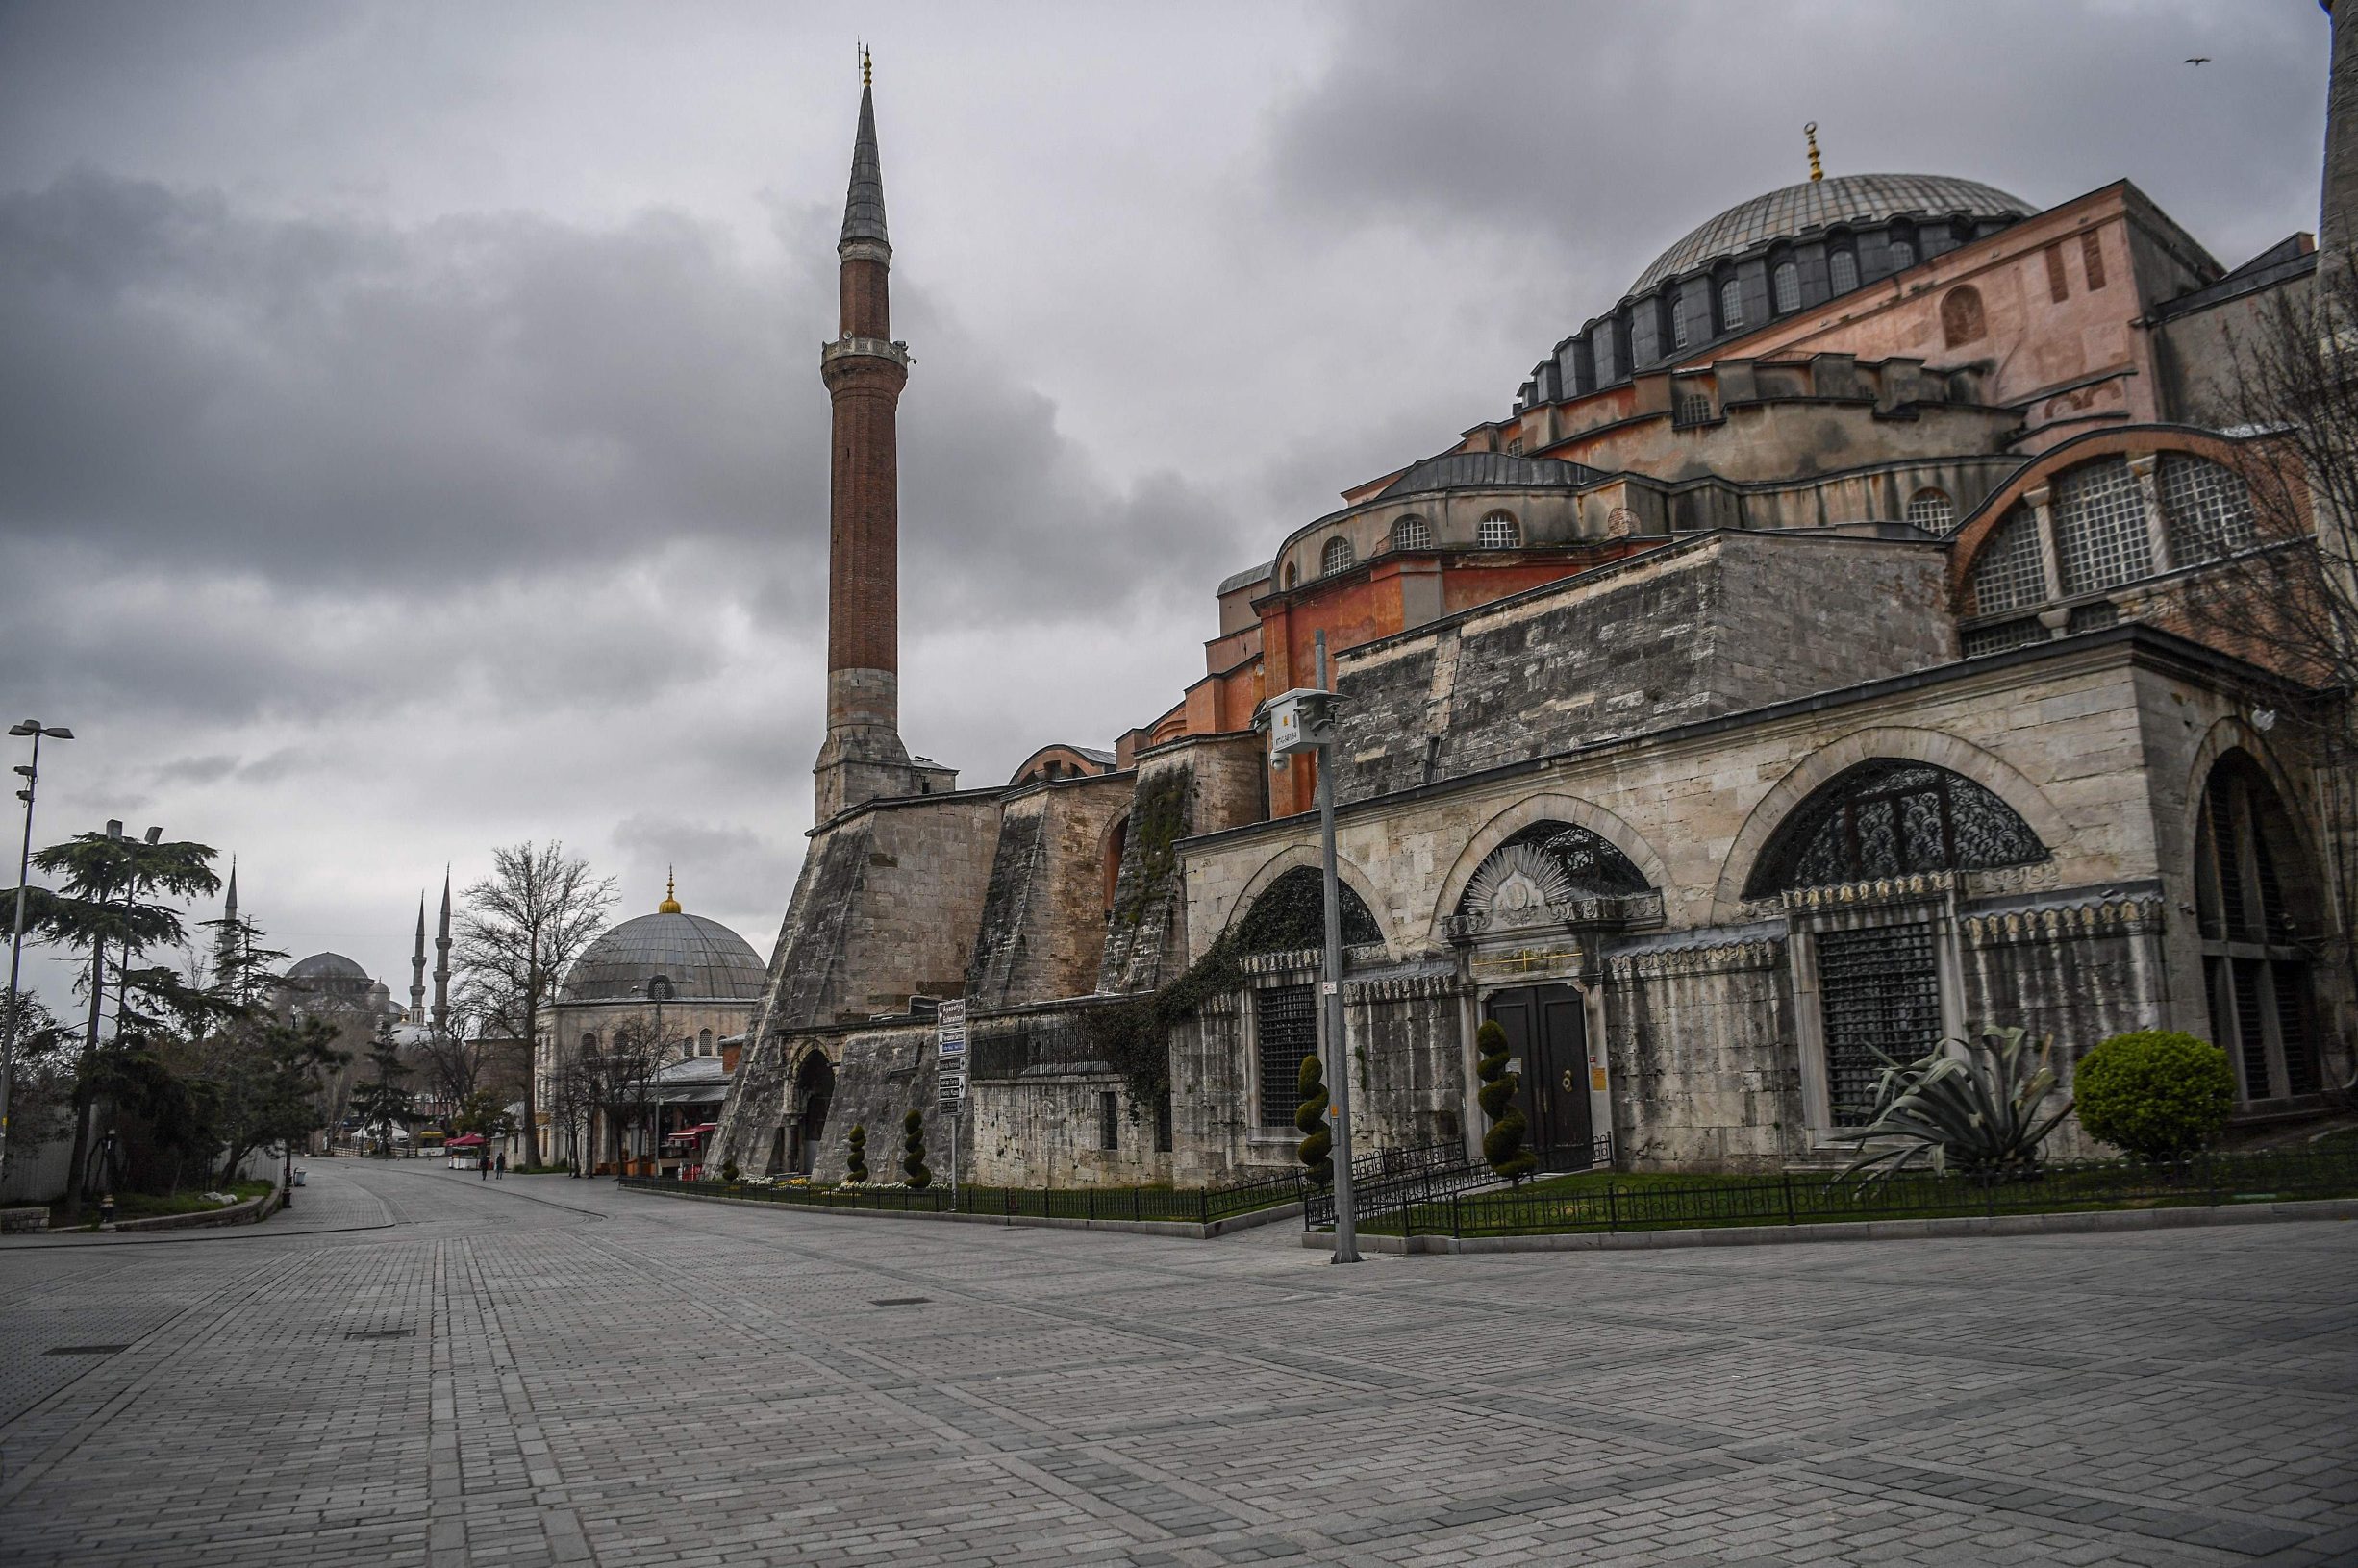 A picture taken on April 1, 2020 shows the empty streets by the iconic Hagia Sophia in Istanbul after Turkish officials have repeatedly urged citizens to stay home and respect social distancing rules. - More than 200 people have died from COVID-19 (the novel coronavirus) in Turkey, which has ramped up tests to more than 15,000 a day, Turkish Health Minister announced on March 31, 2020. (Photo by Ozan KOSE / AFP)